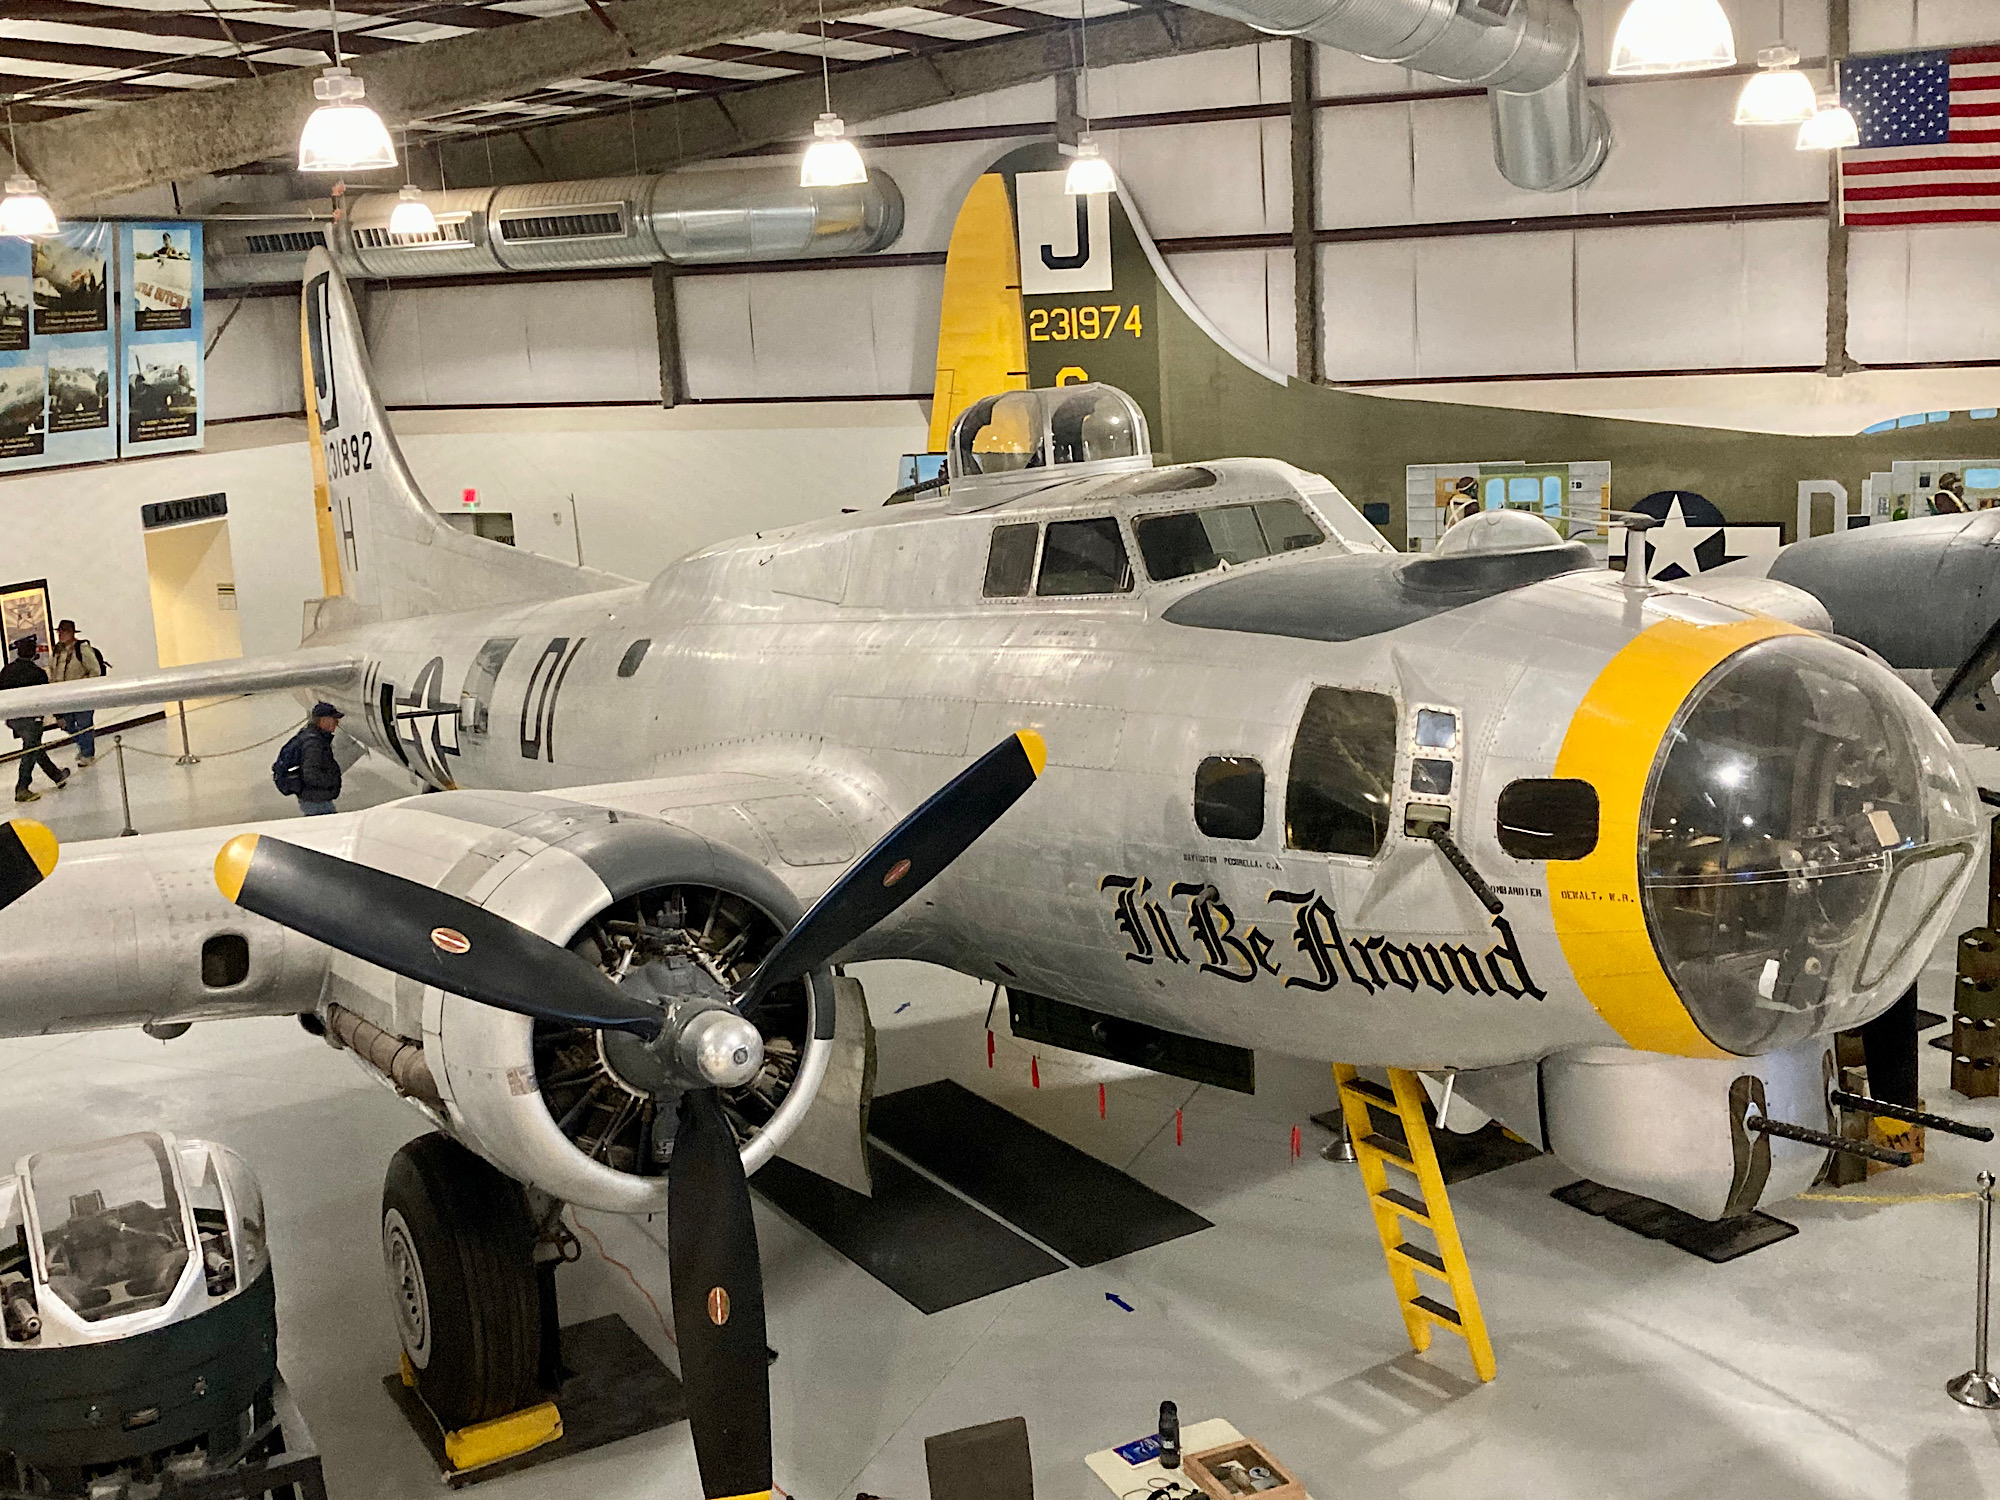 Grey and Yellow painted B-17 bomber named "I'll Be Around" in hangar